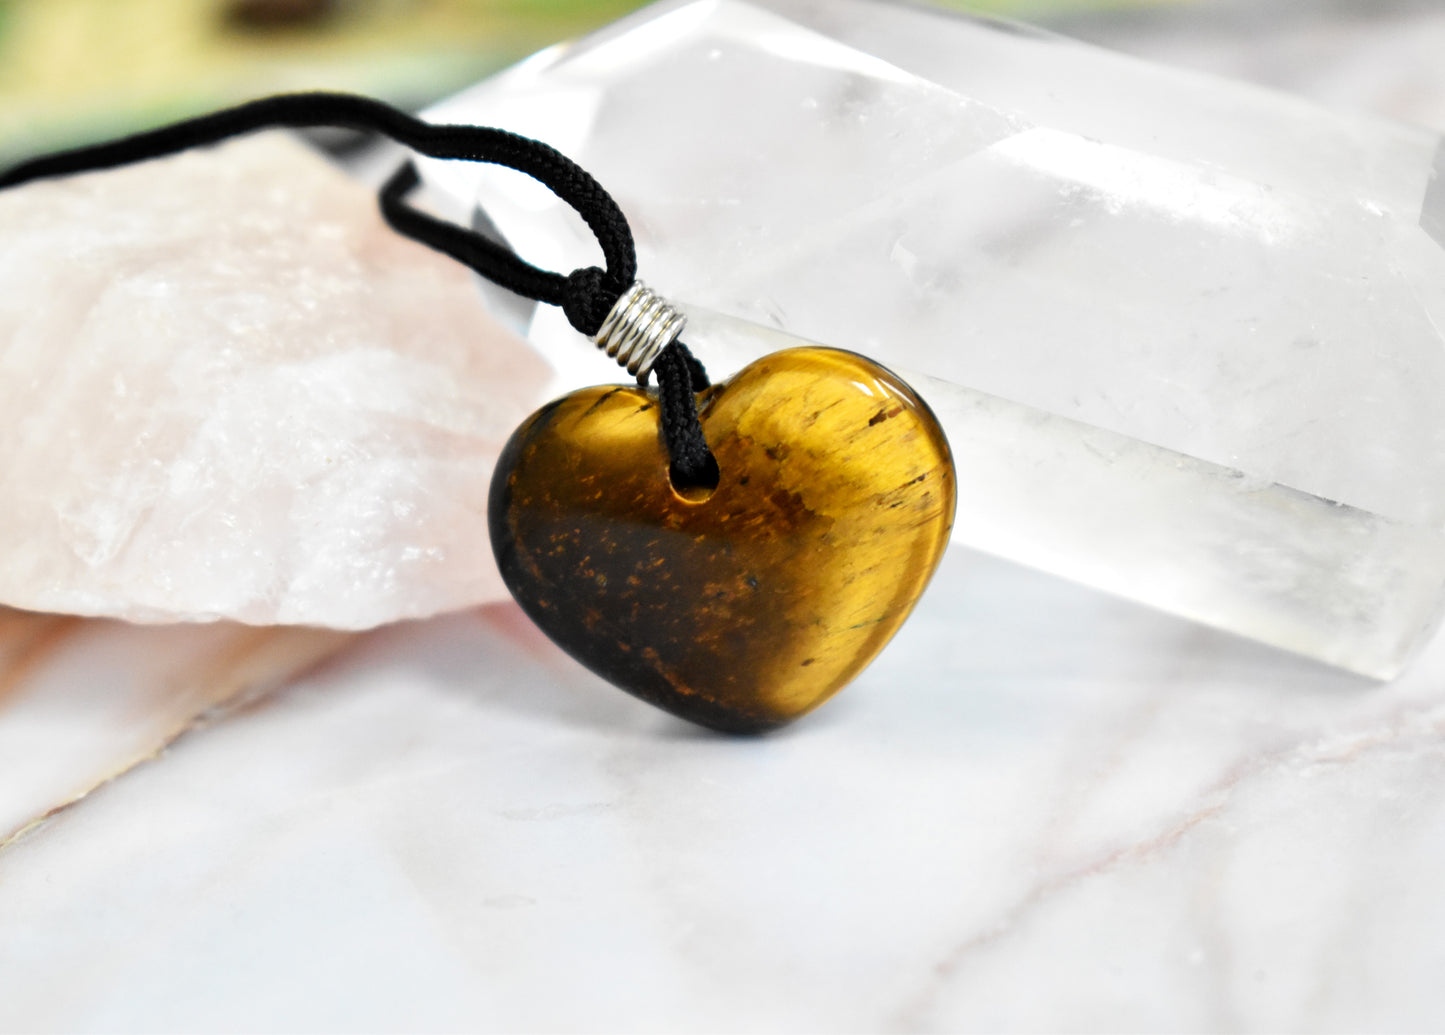 Tigers Eye Necklace